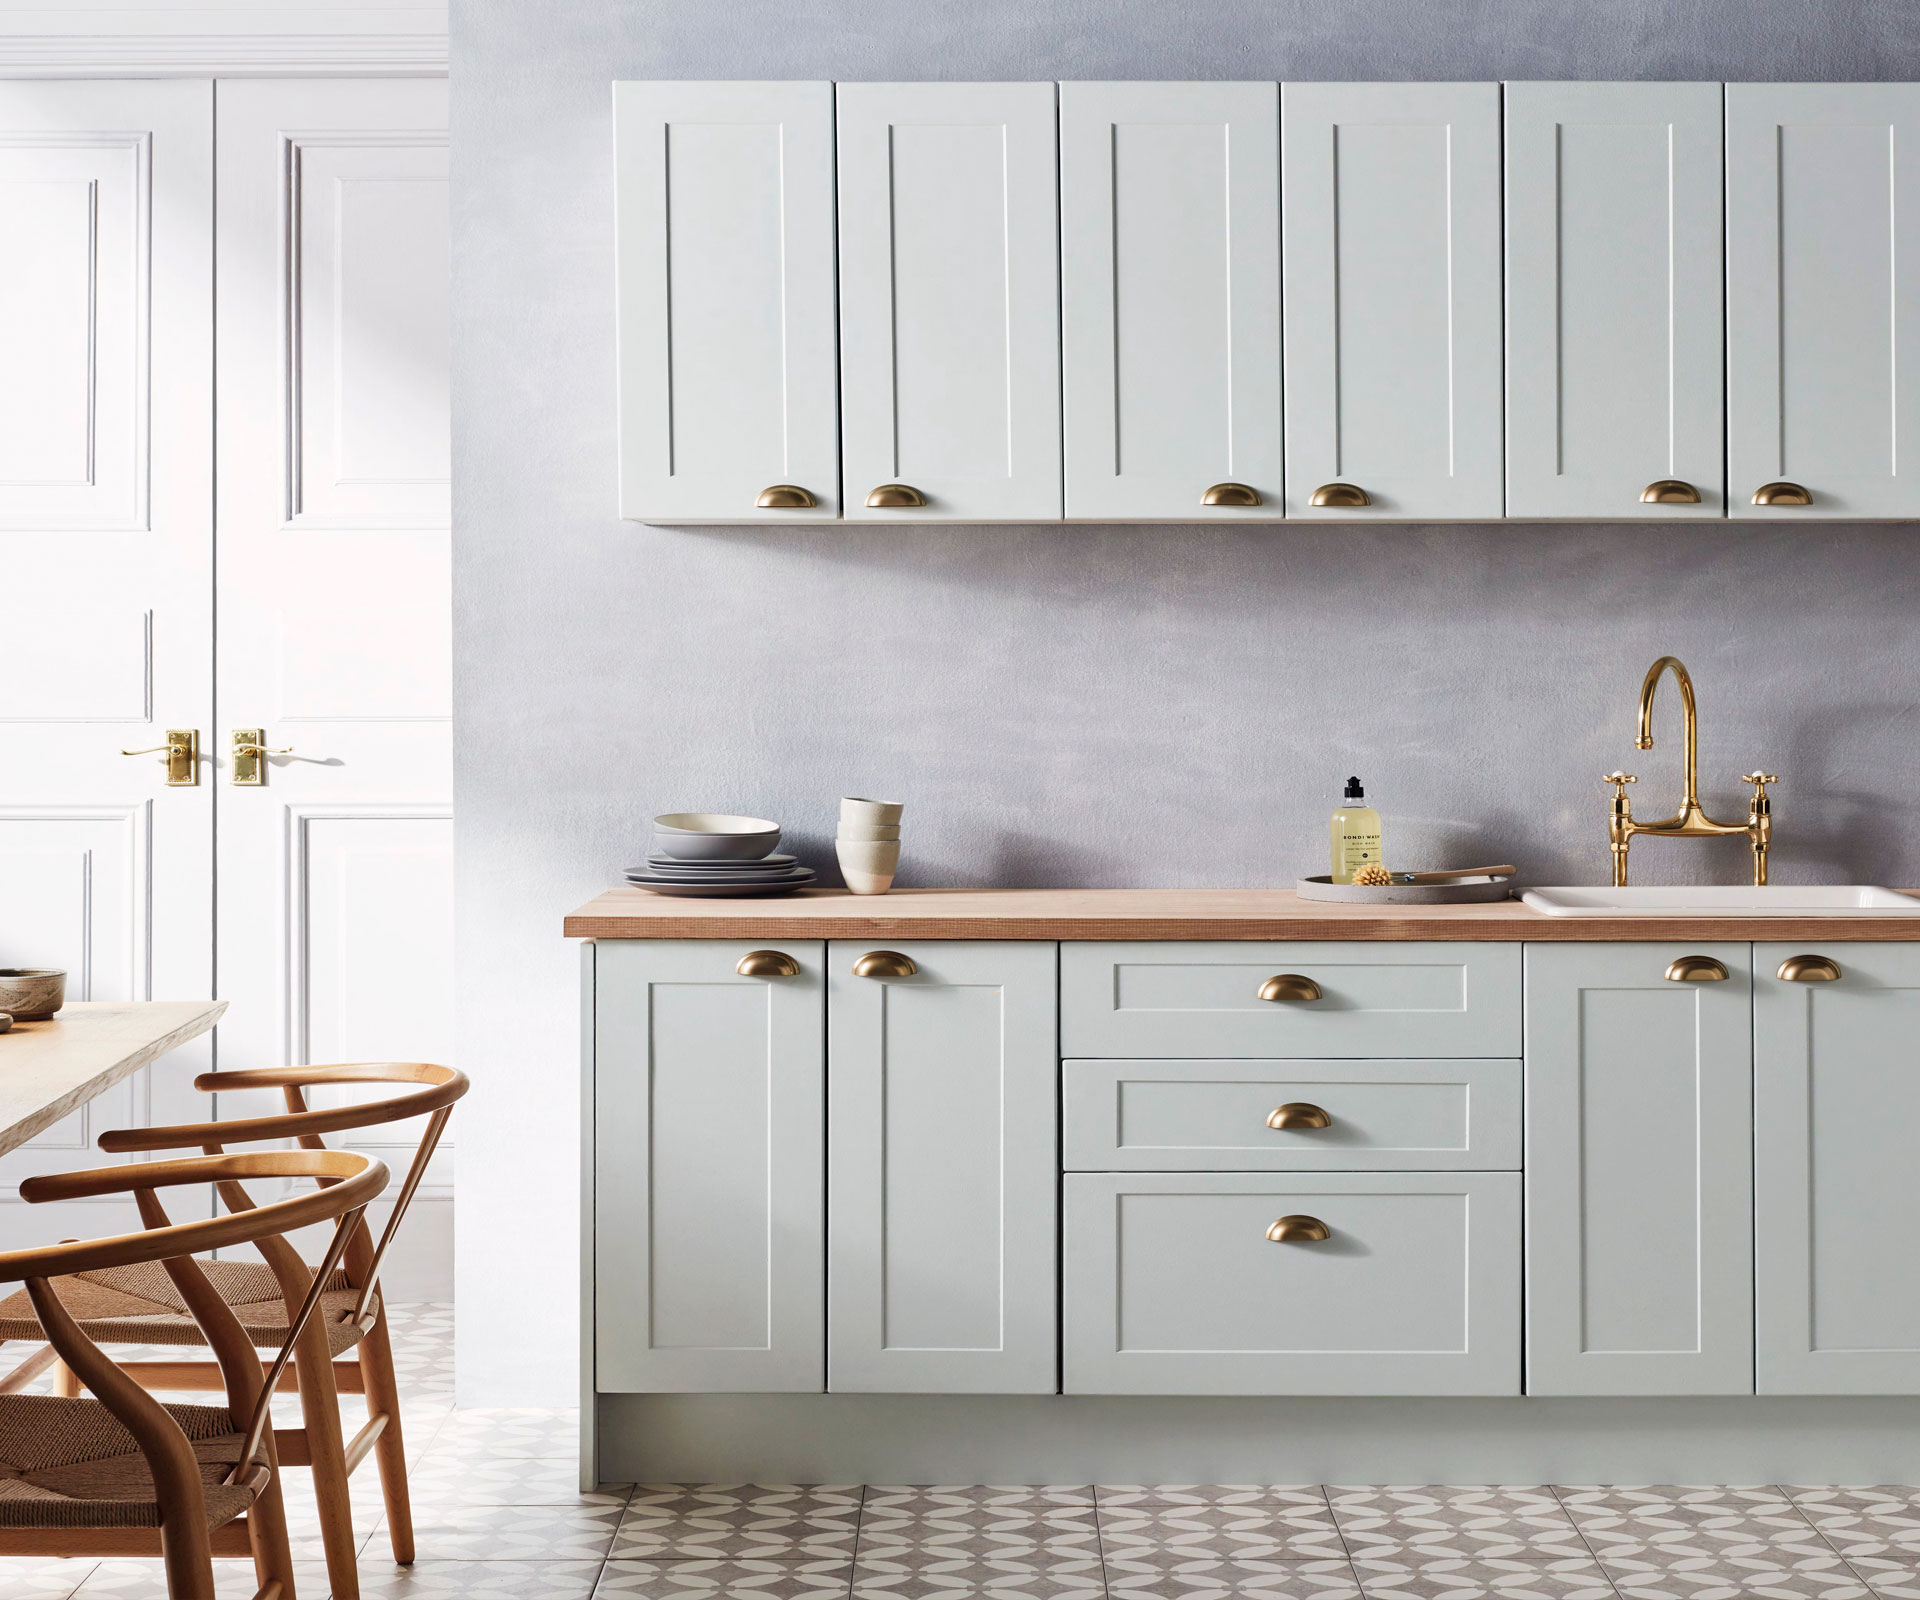 7 Budget Flatpack Kitchens And How To Style The Look